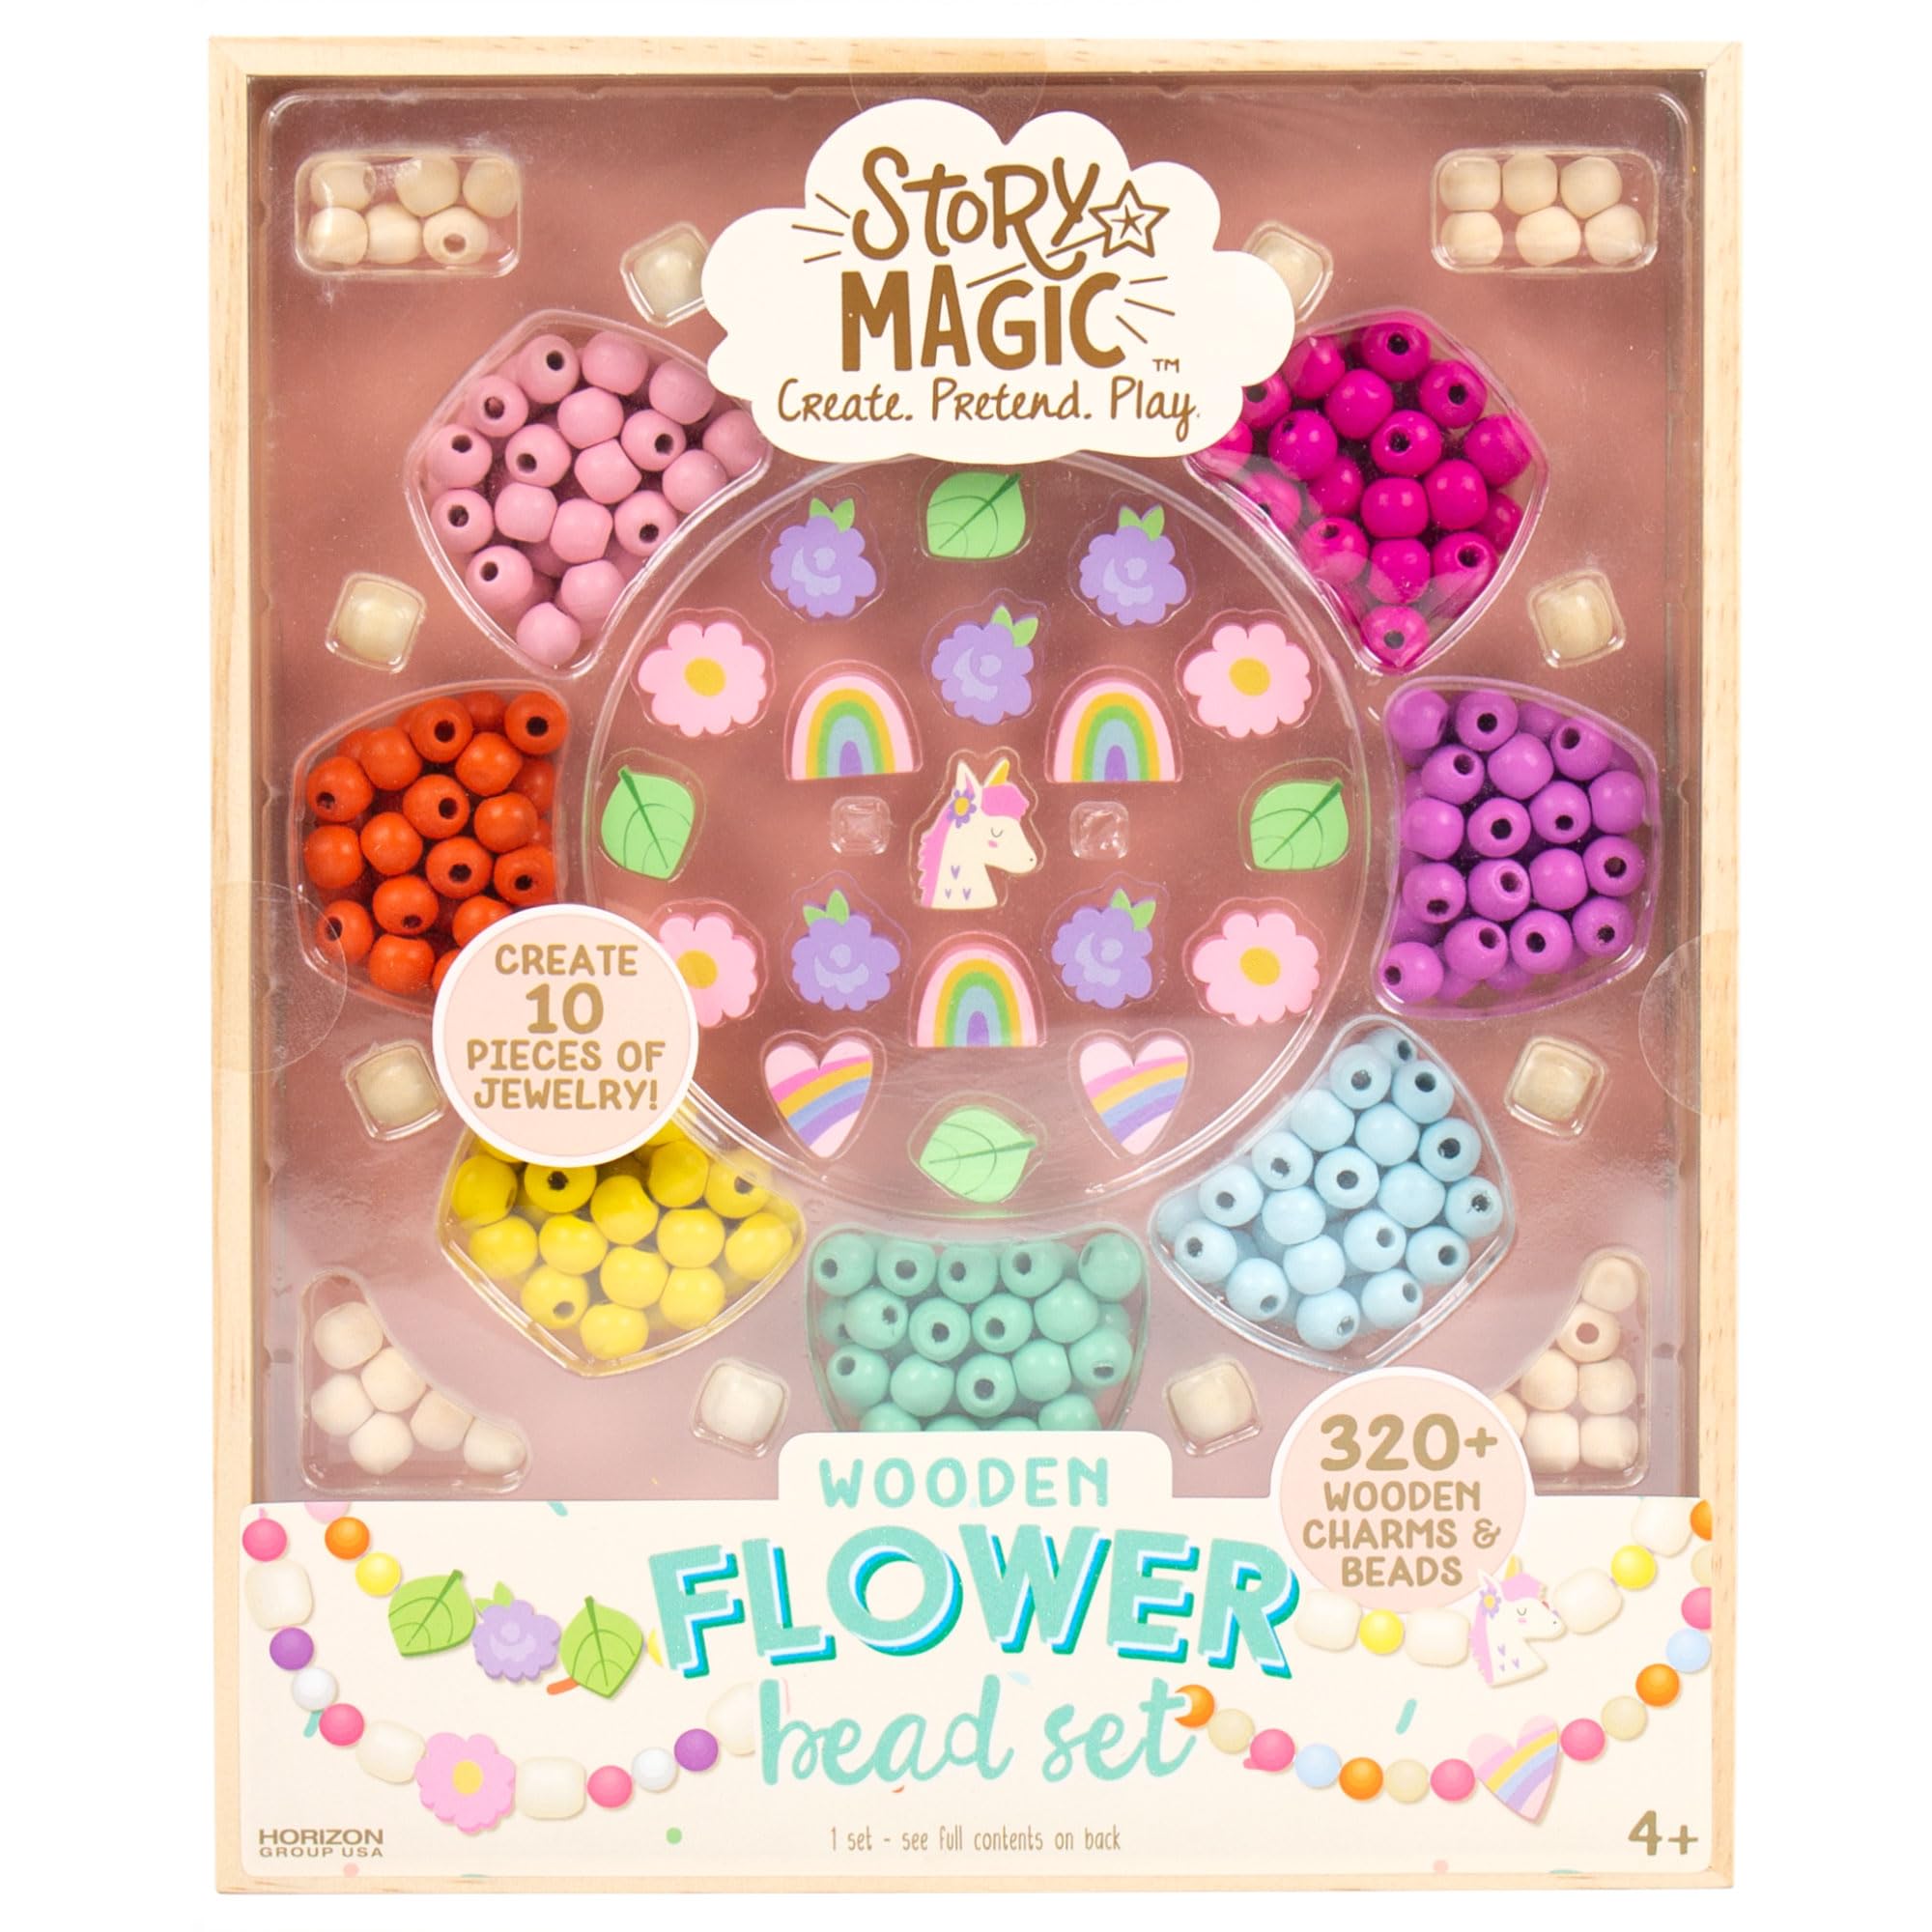 Story Magic Wooden Flower Bead Set, Over 300 Large Hole Wood Beads & Charms for Beading Bracelets, Bracelet Making Kit, Flower Bracelet Kit, Whimsical Bracelet Charms, Storage Tray Included, Ages 4+